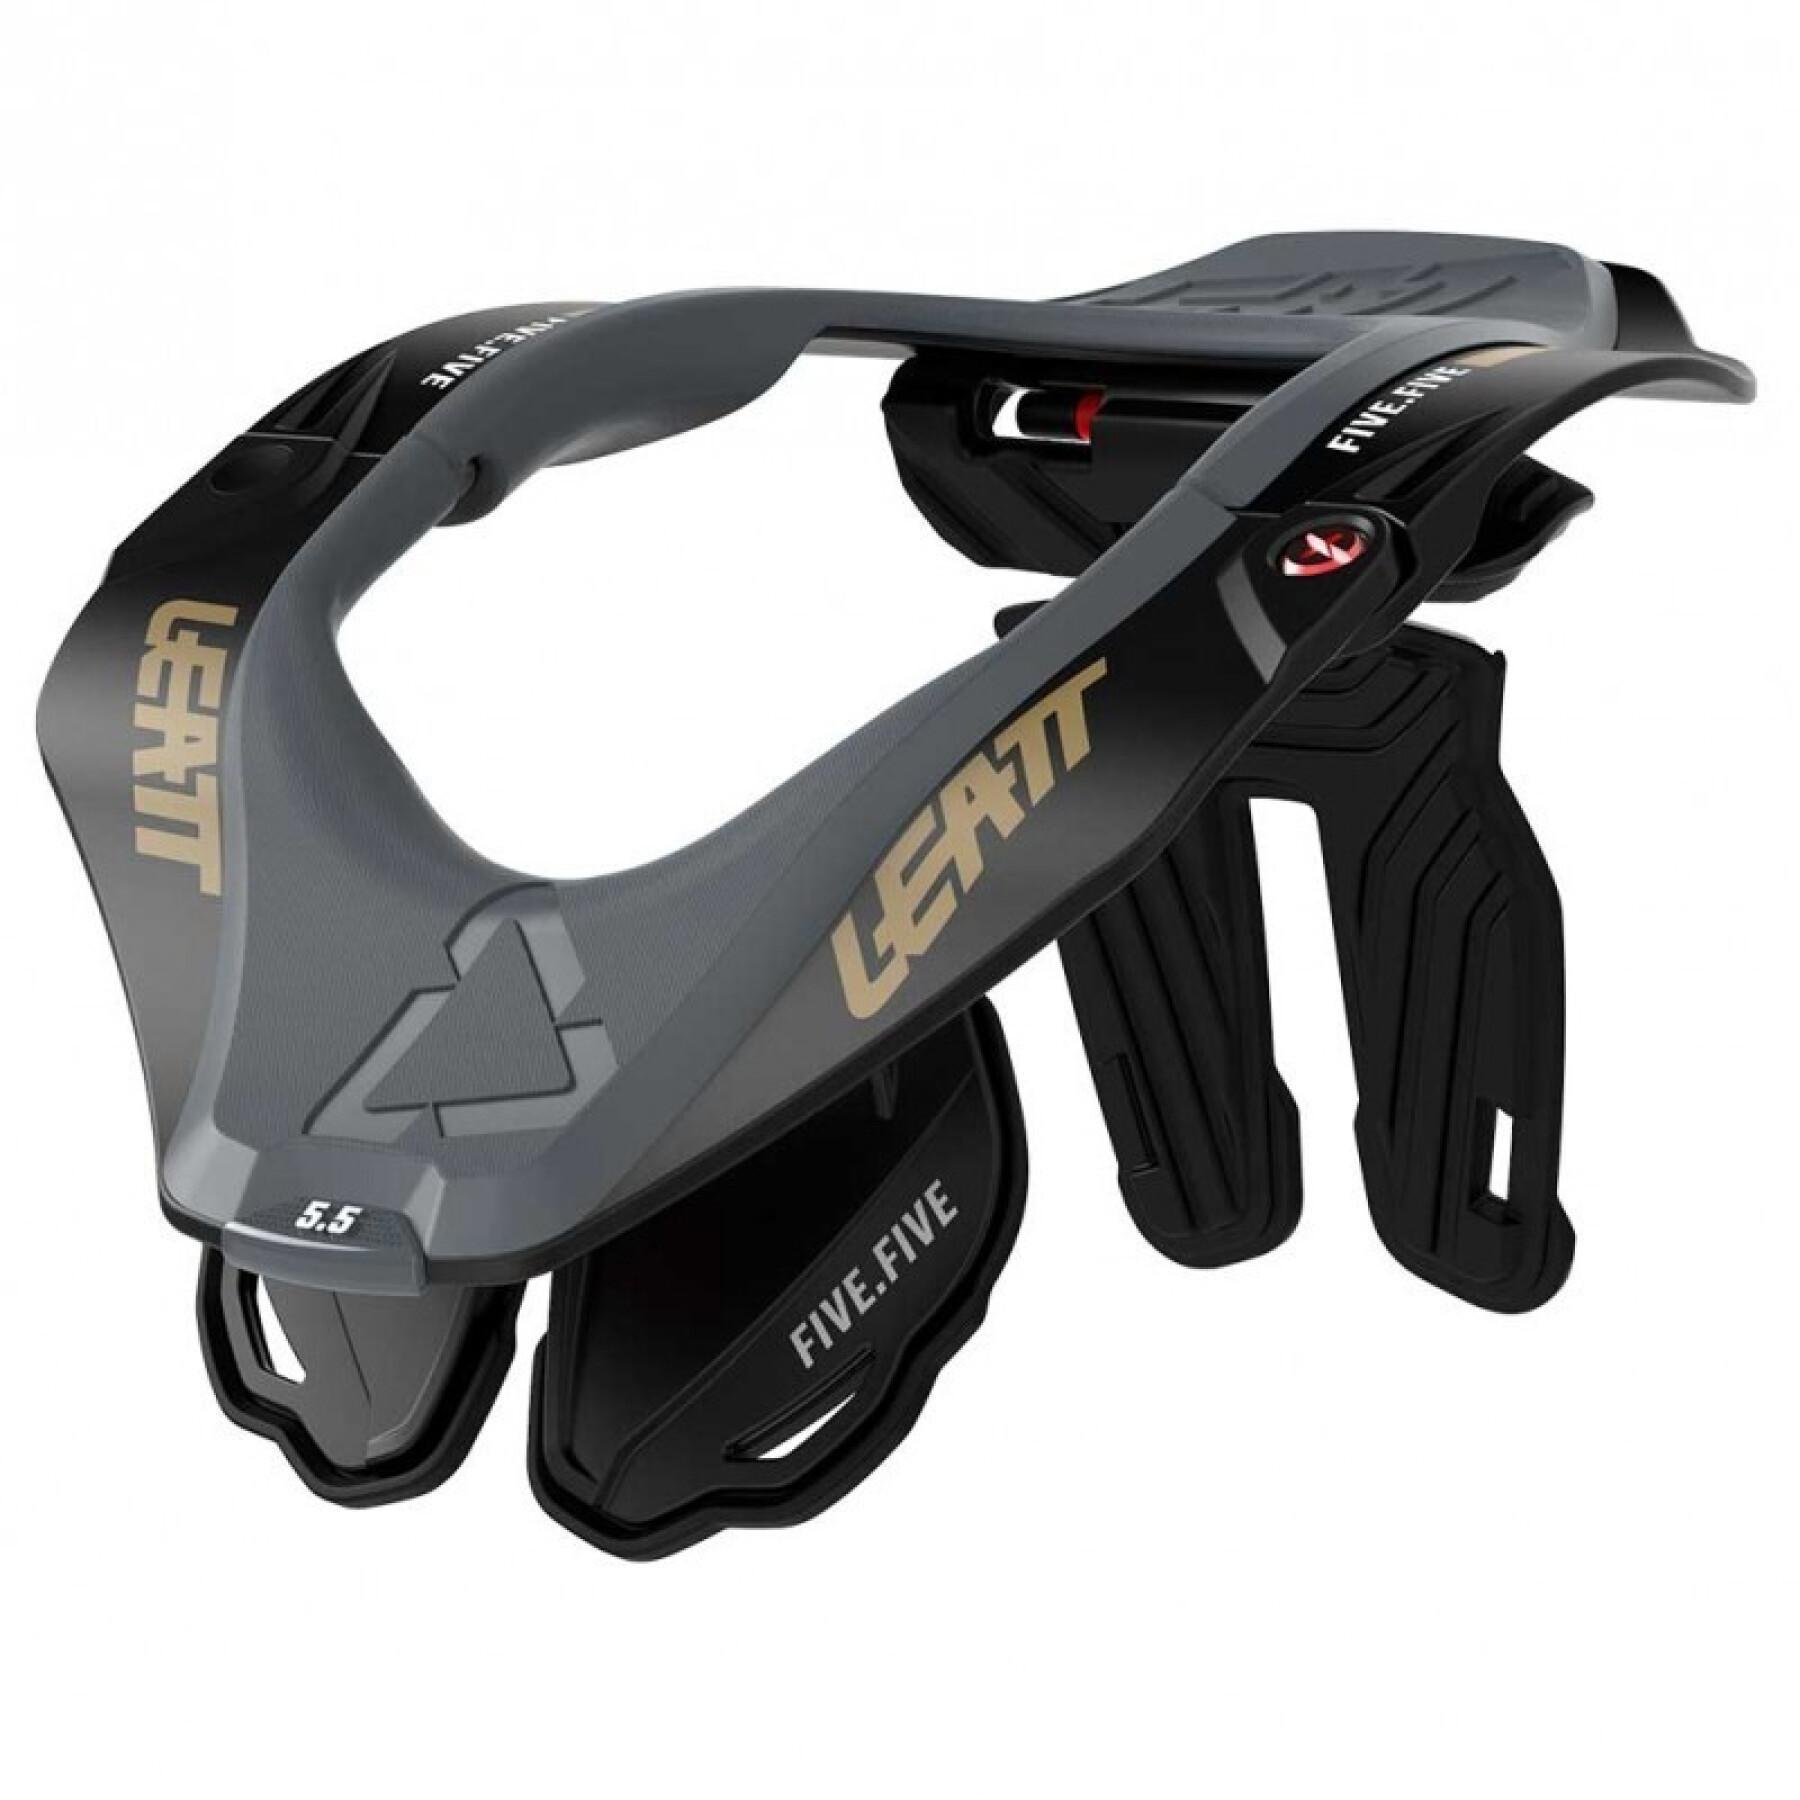 Motorcycle neck protection Leatt 5.5 Stealth